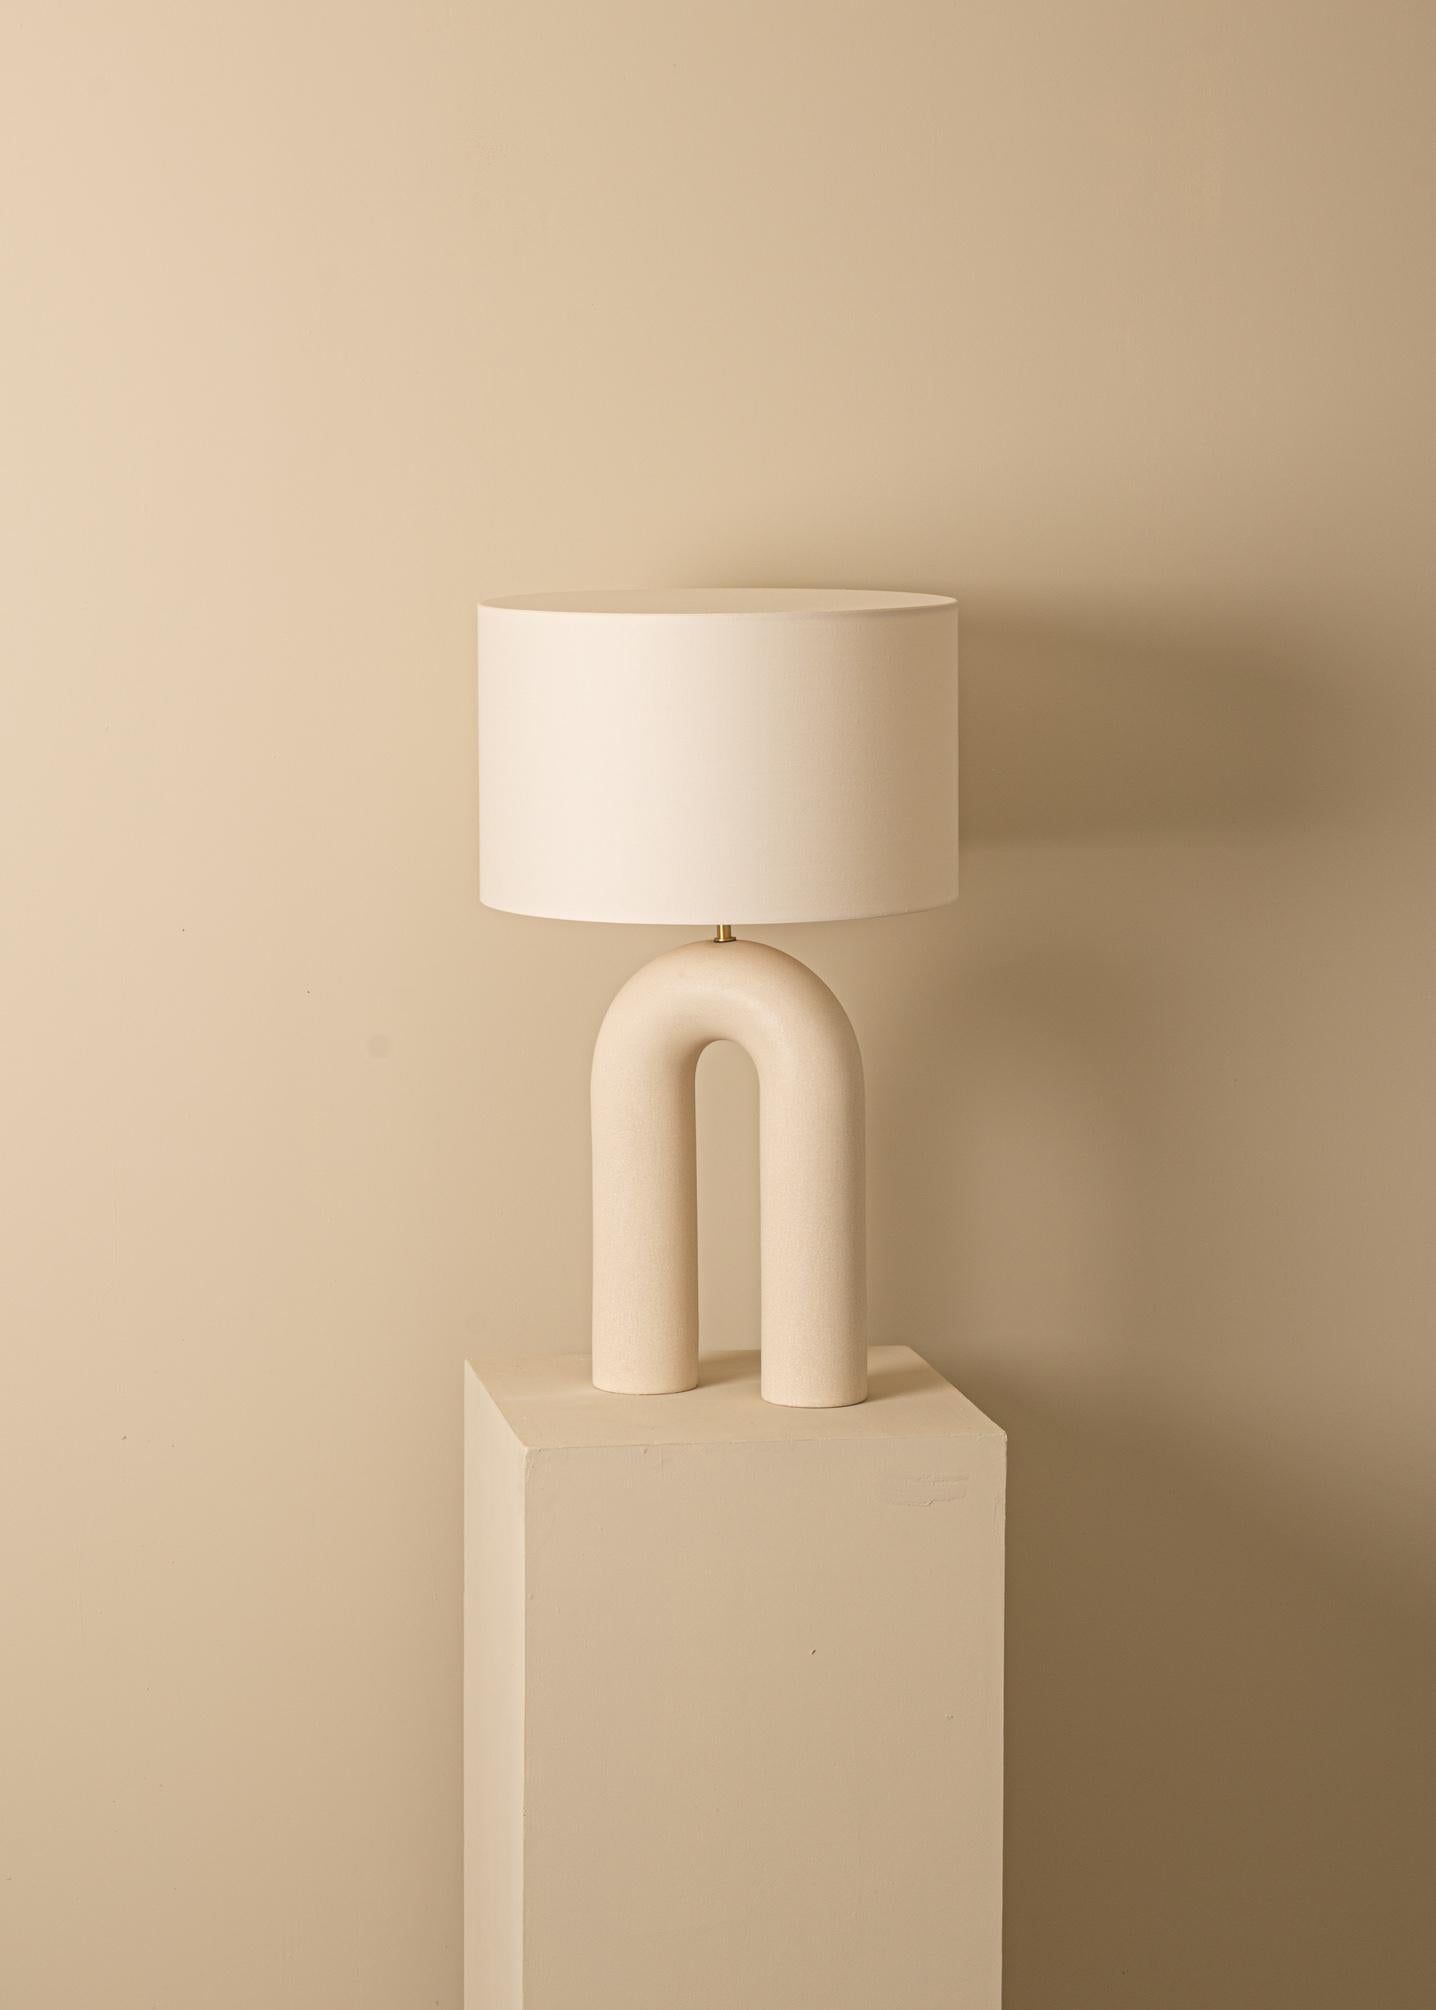 Ecru Ceramic Arko Table Lamp with White Lampshade by Simone & Marcel
Dimensions: Ø 40 x H 67 cm.
Materials: Cotton lampshade and ceramic.

Also available in different marbles and ceramics. Custom options available on request. Please contact us.